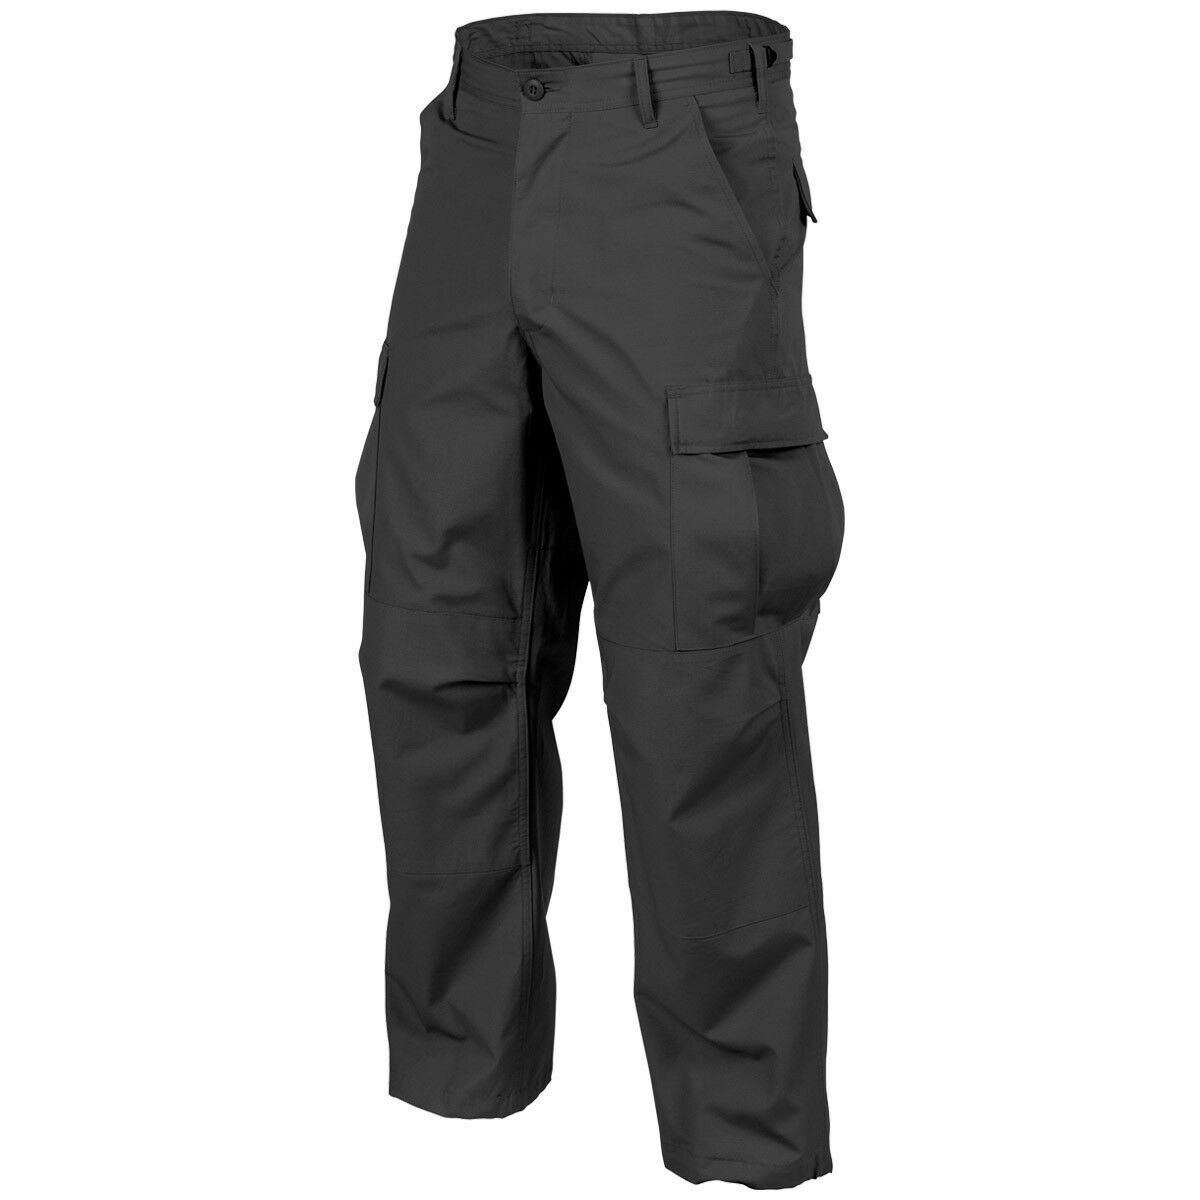 Pants Helikon Tex Trousers BDU Combat Work Cargo SAS Special Forces RipStop New